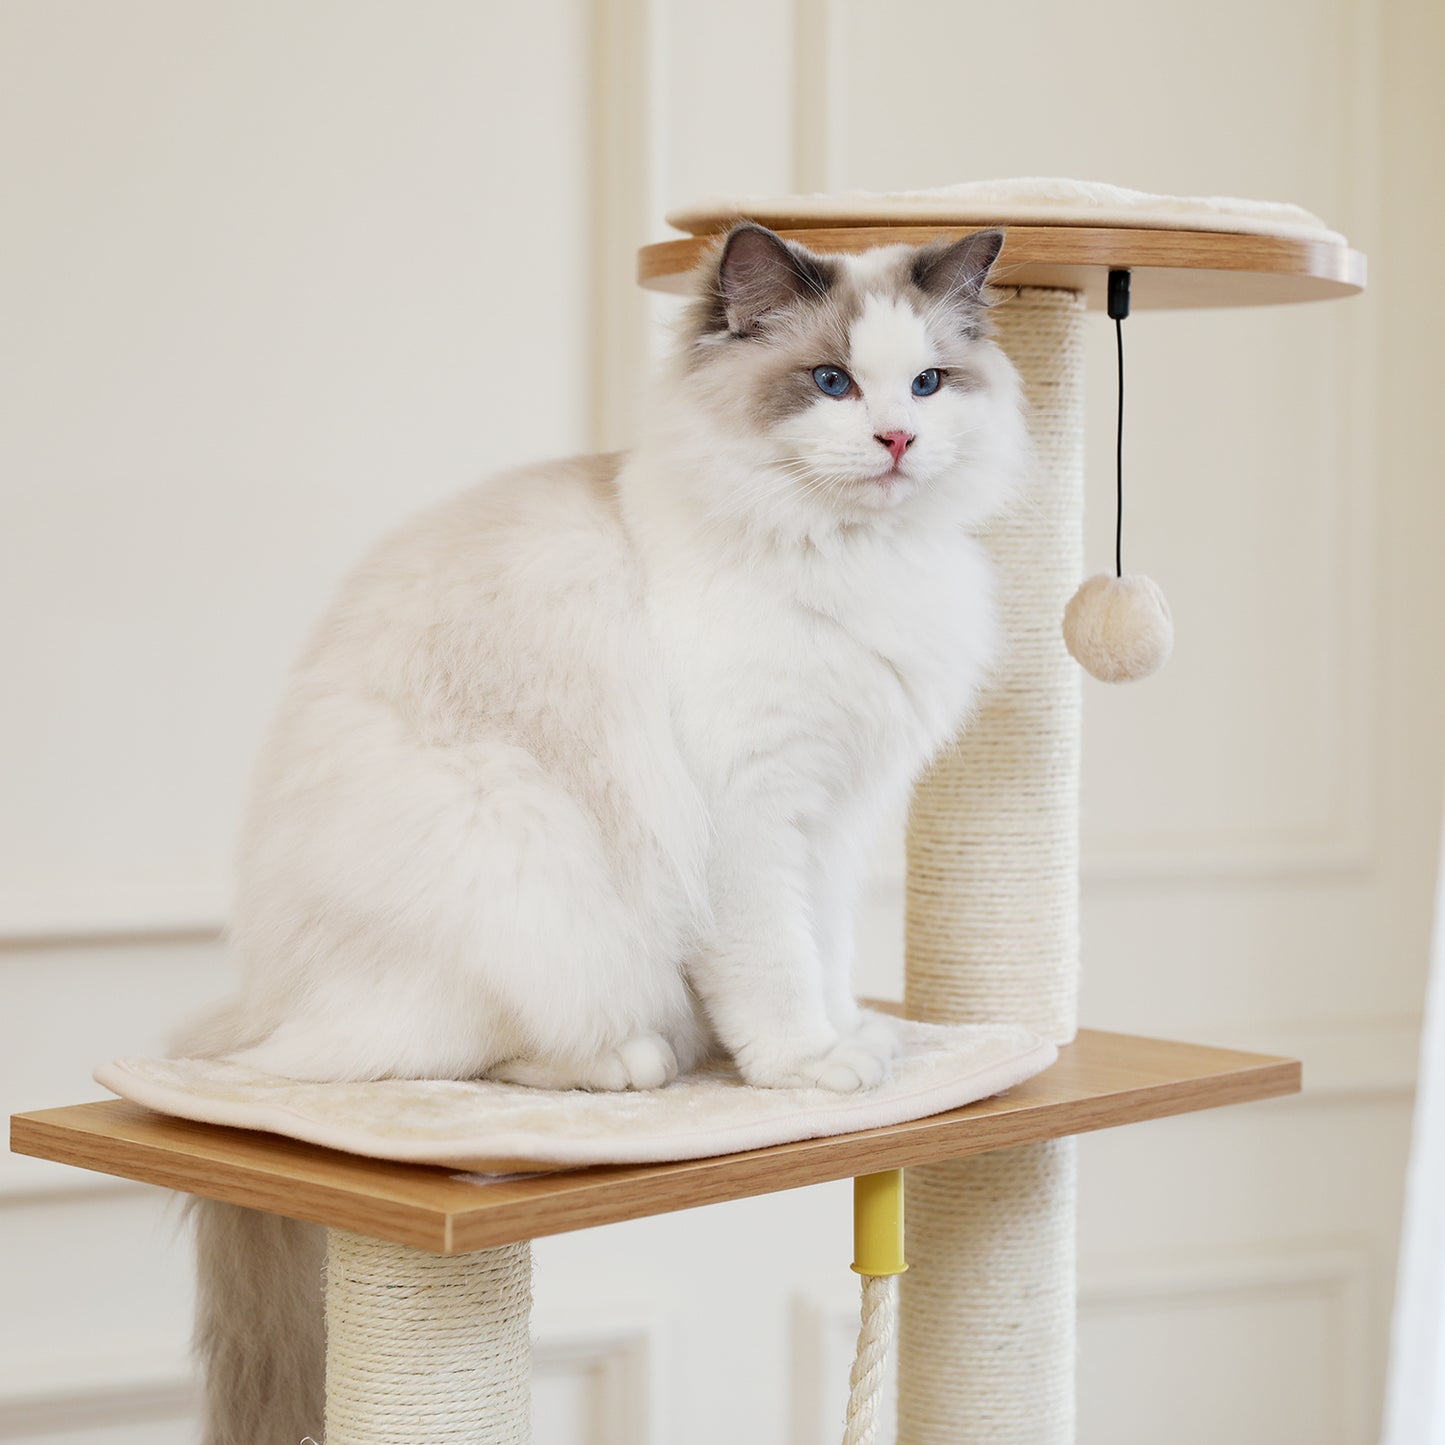 Modern Wooden Cat Tree Multi-Level Cat Tower With Fully Sisal Covering Scratching Posts, Deluxe Condos And Large Space Capsule Nest